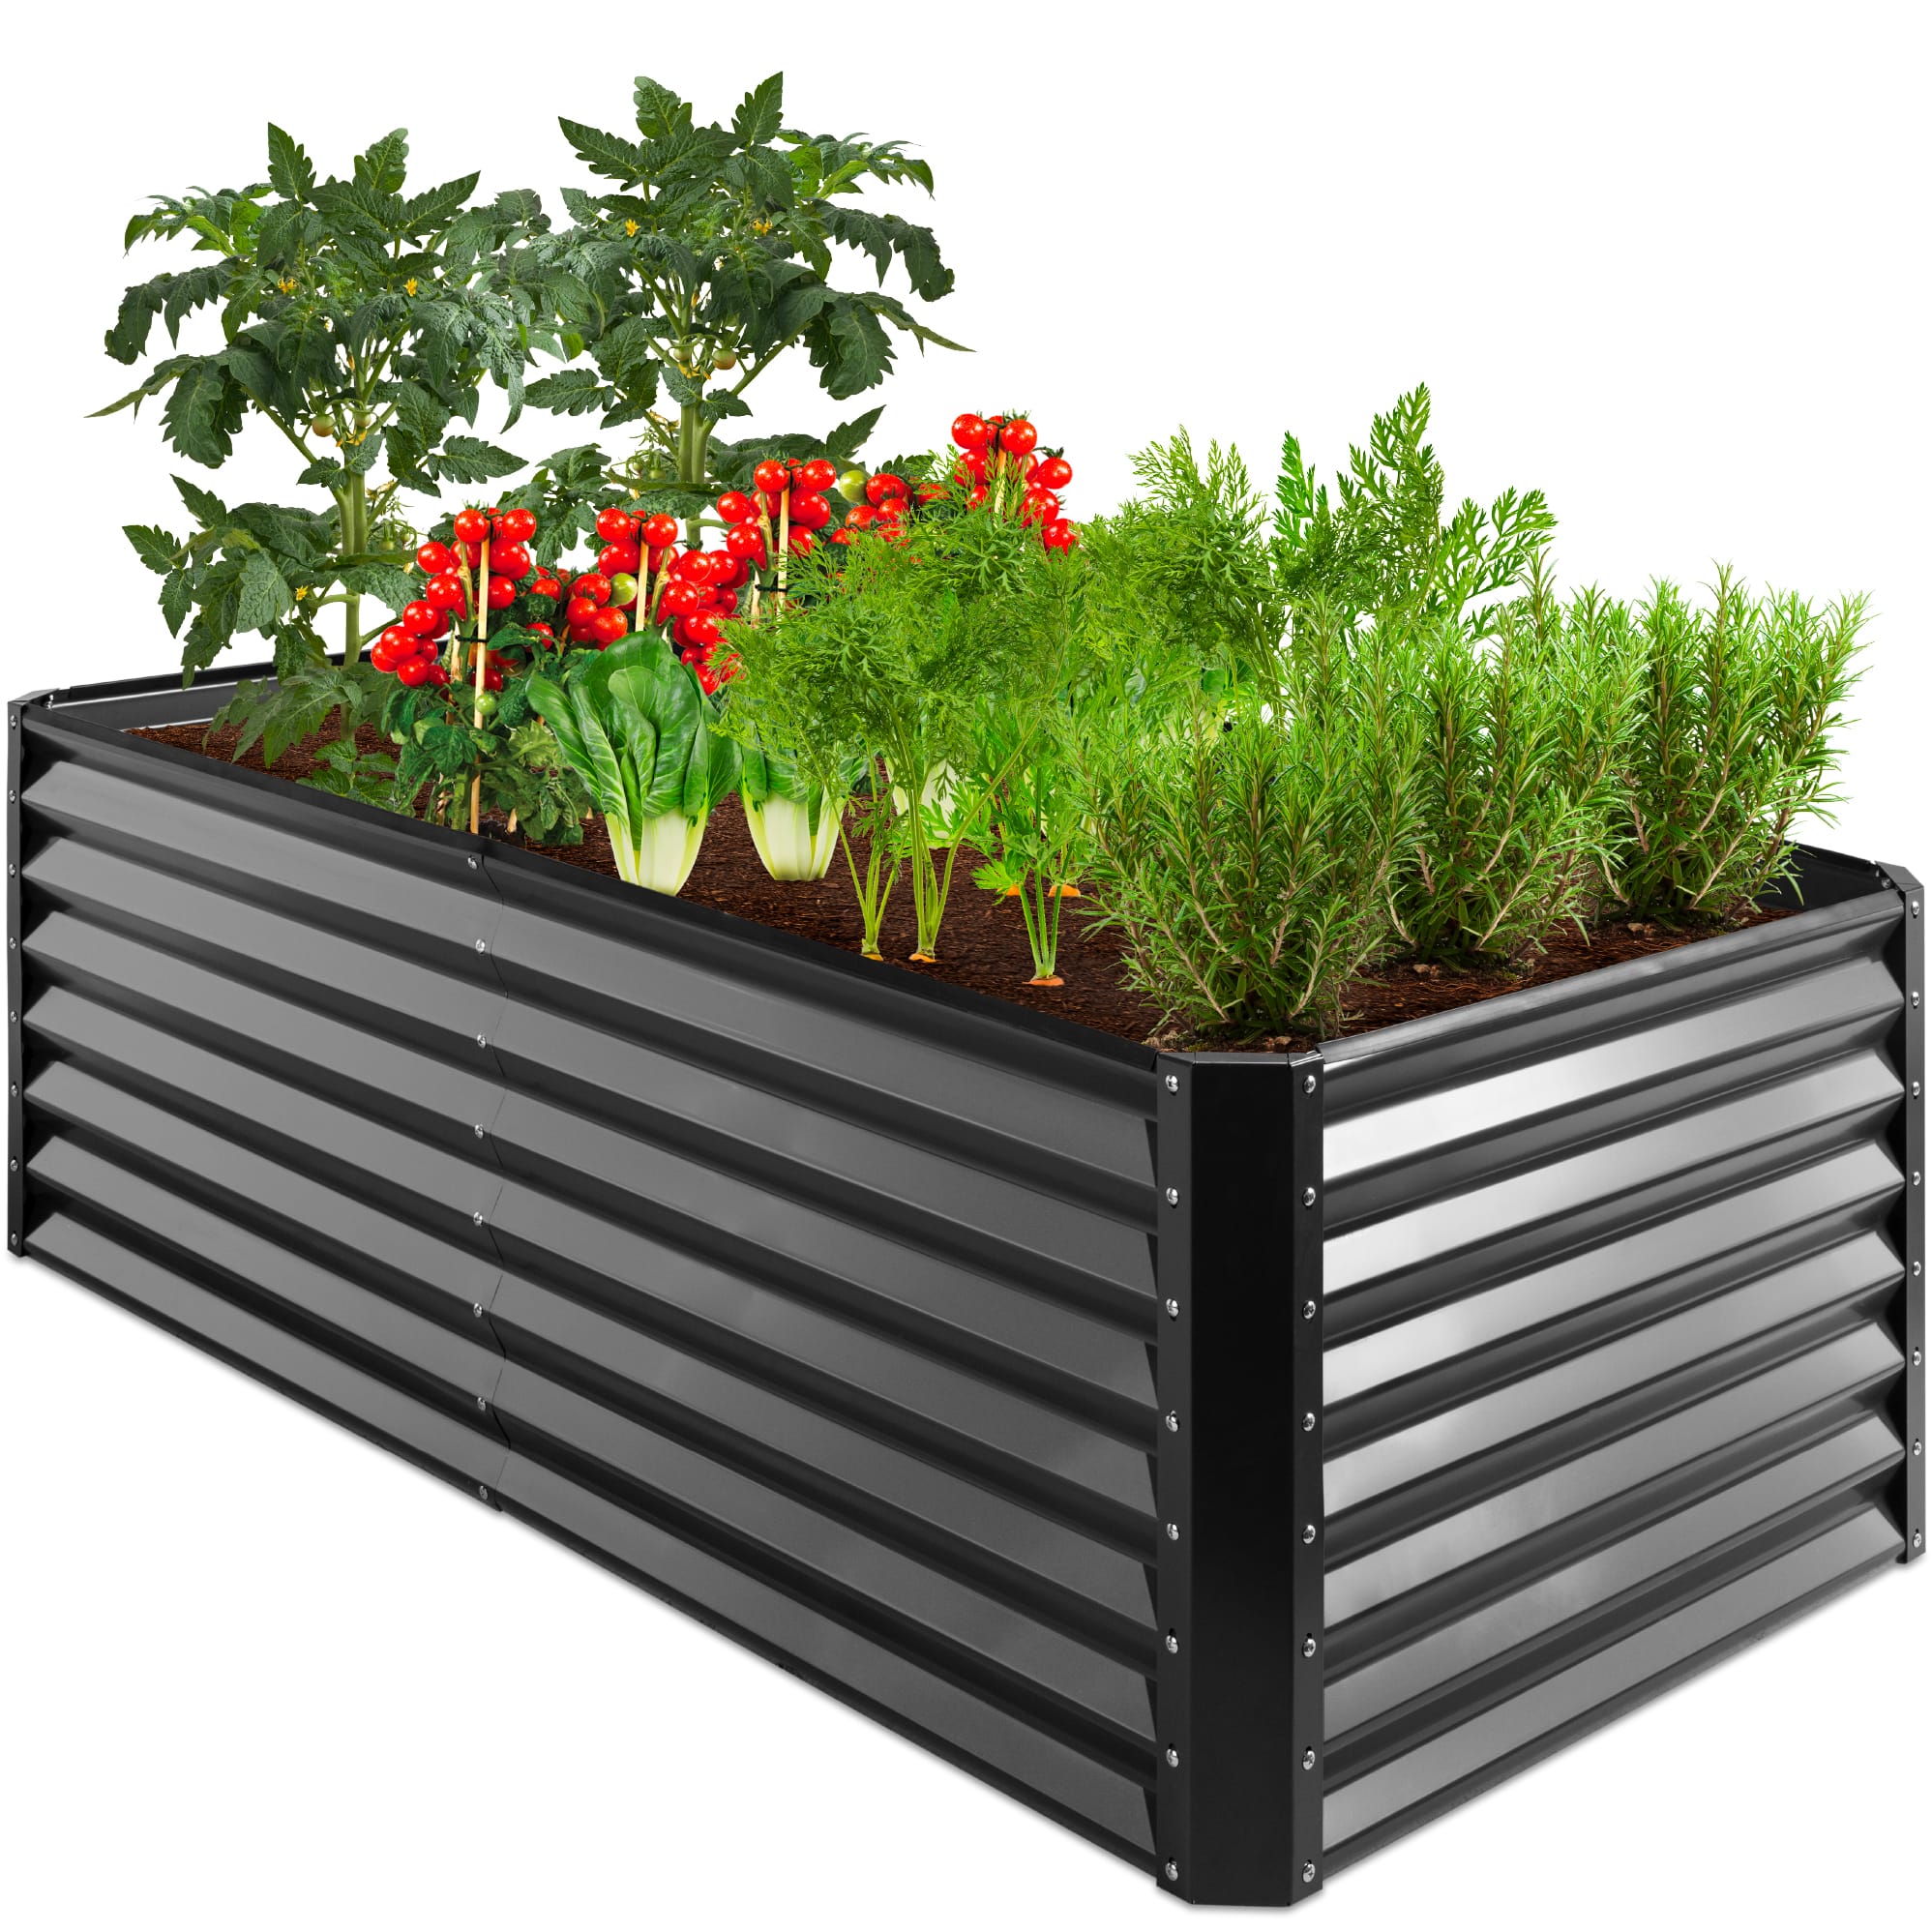 Image for Raised Garden Beds